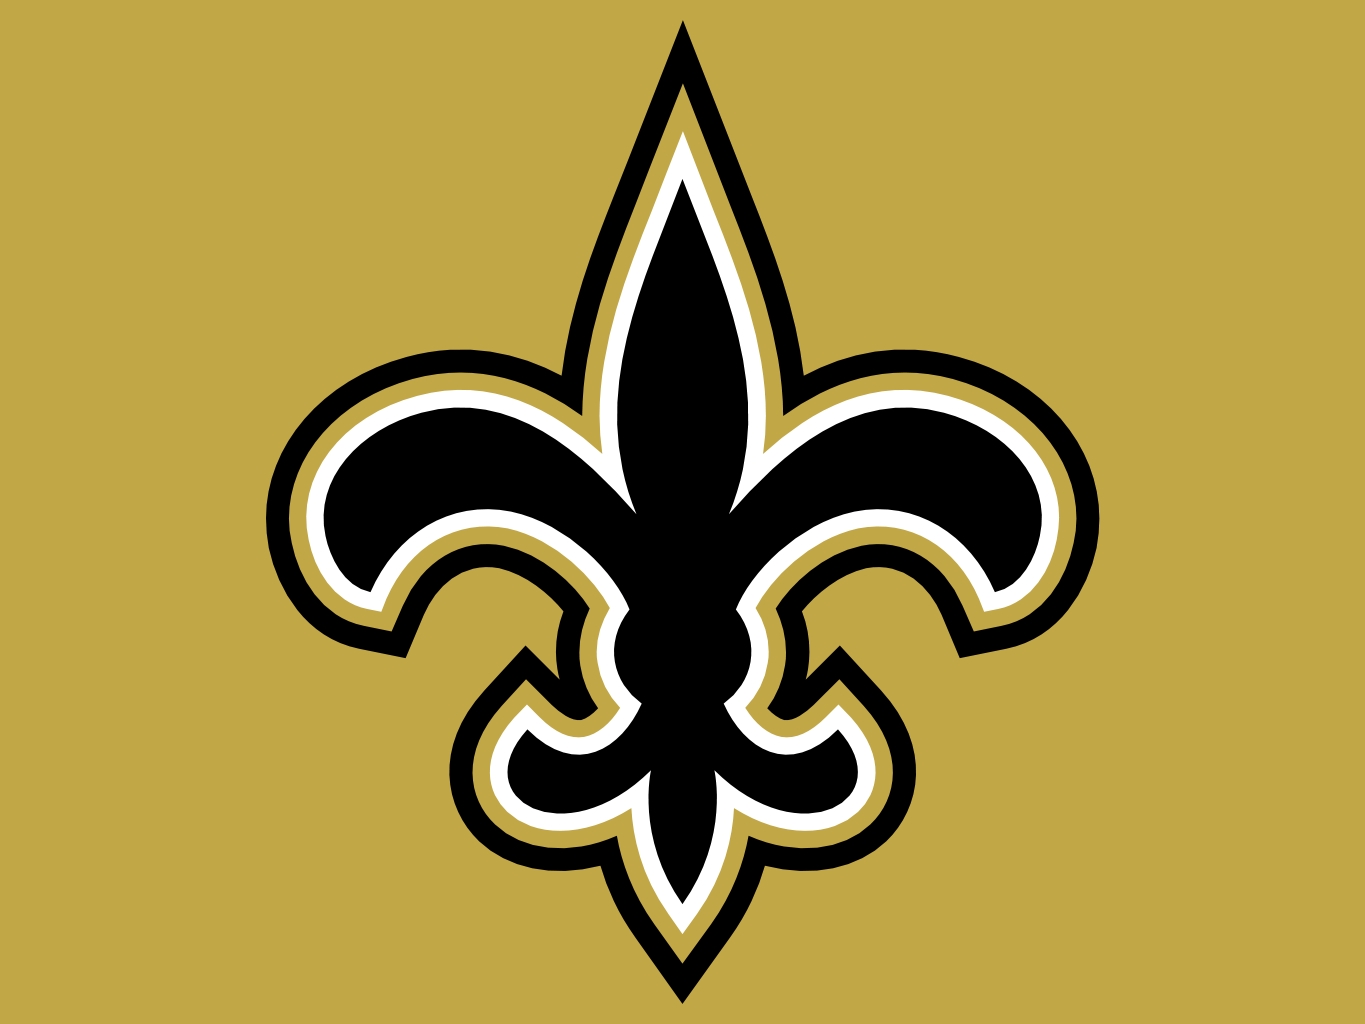 New Orleans Saints, marion county sports